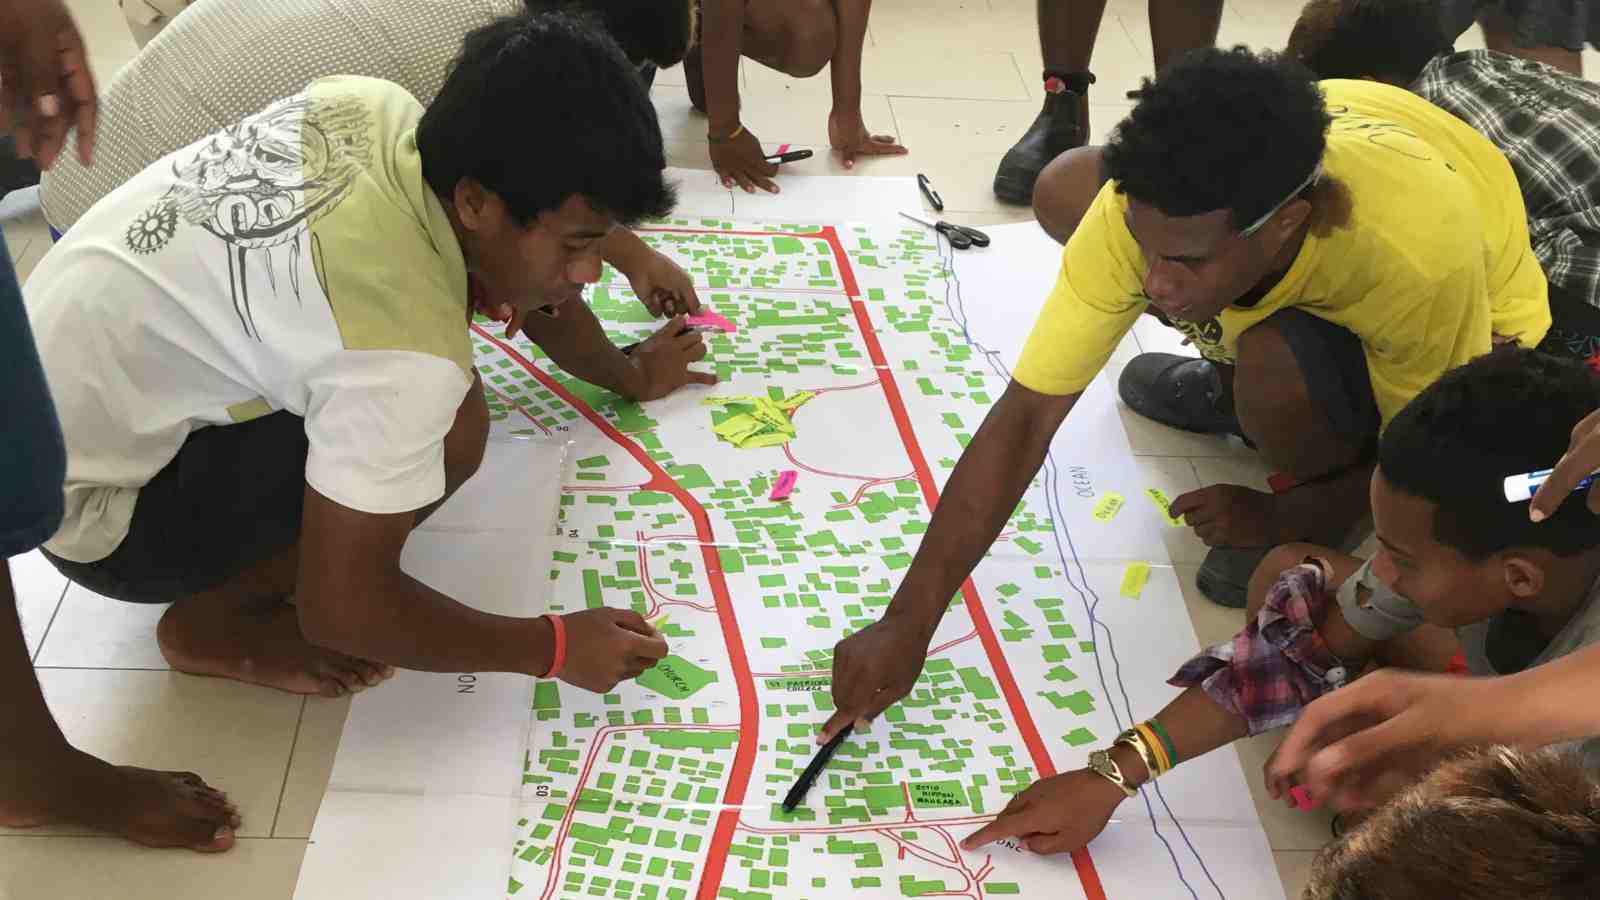 Members of Betio Youth, Kiribati, sit around an architectural drawing of their city, planning their new community centre. 